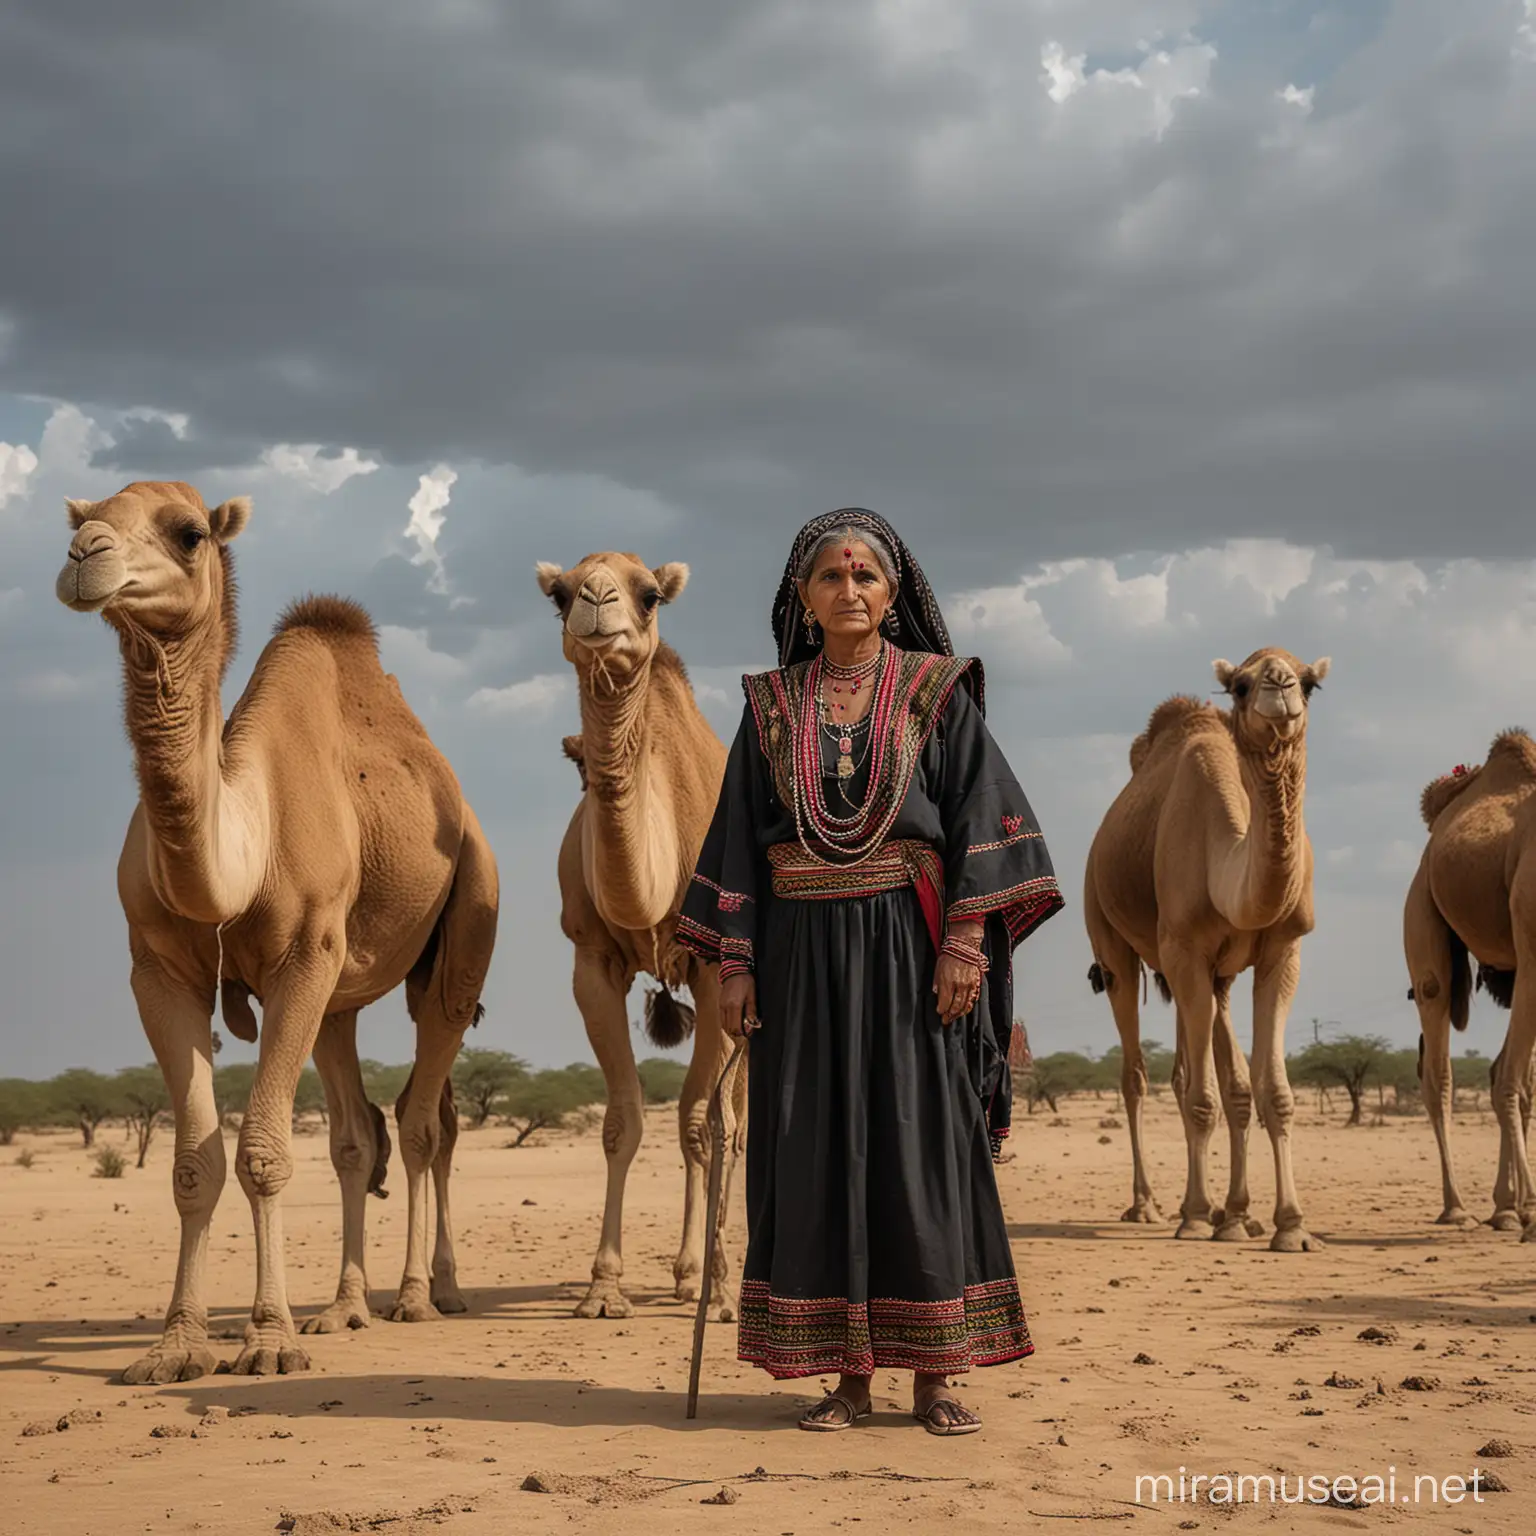 Elderly Rabari Woman in Traditional Black Clothing Standing Amidst Camels in Desert Landscape under Cloudy Sky